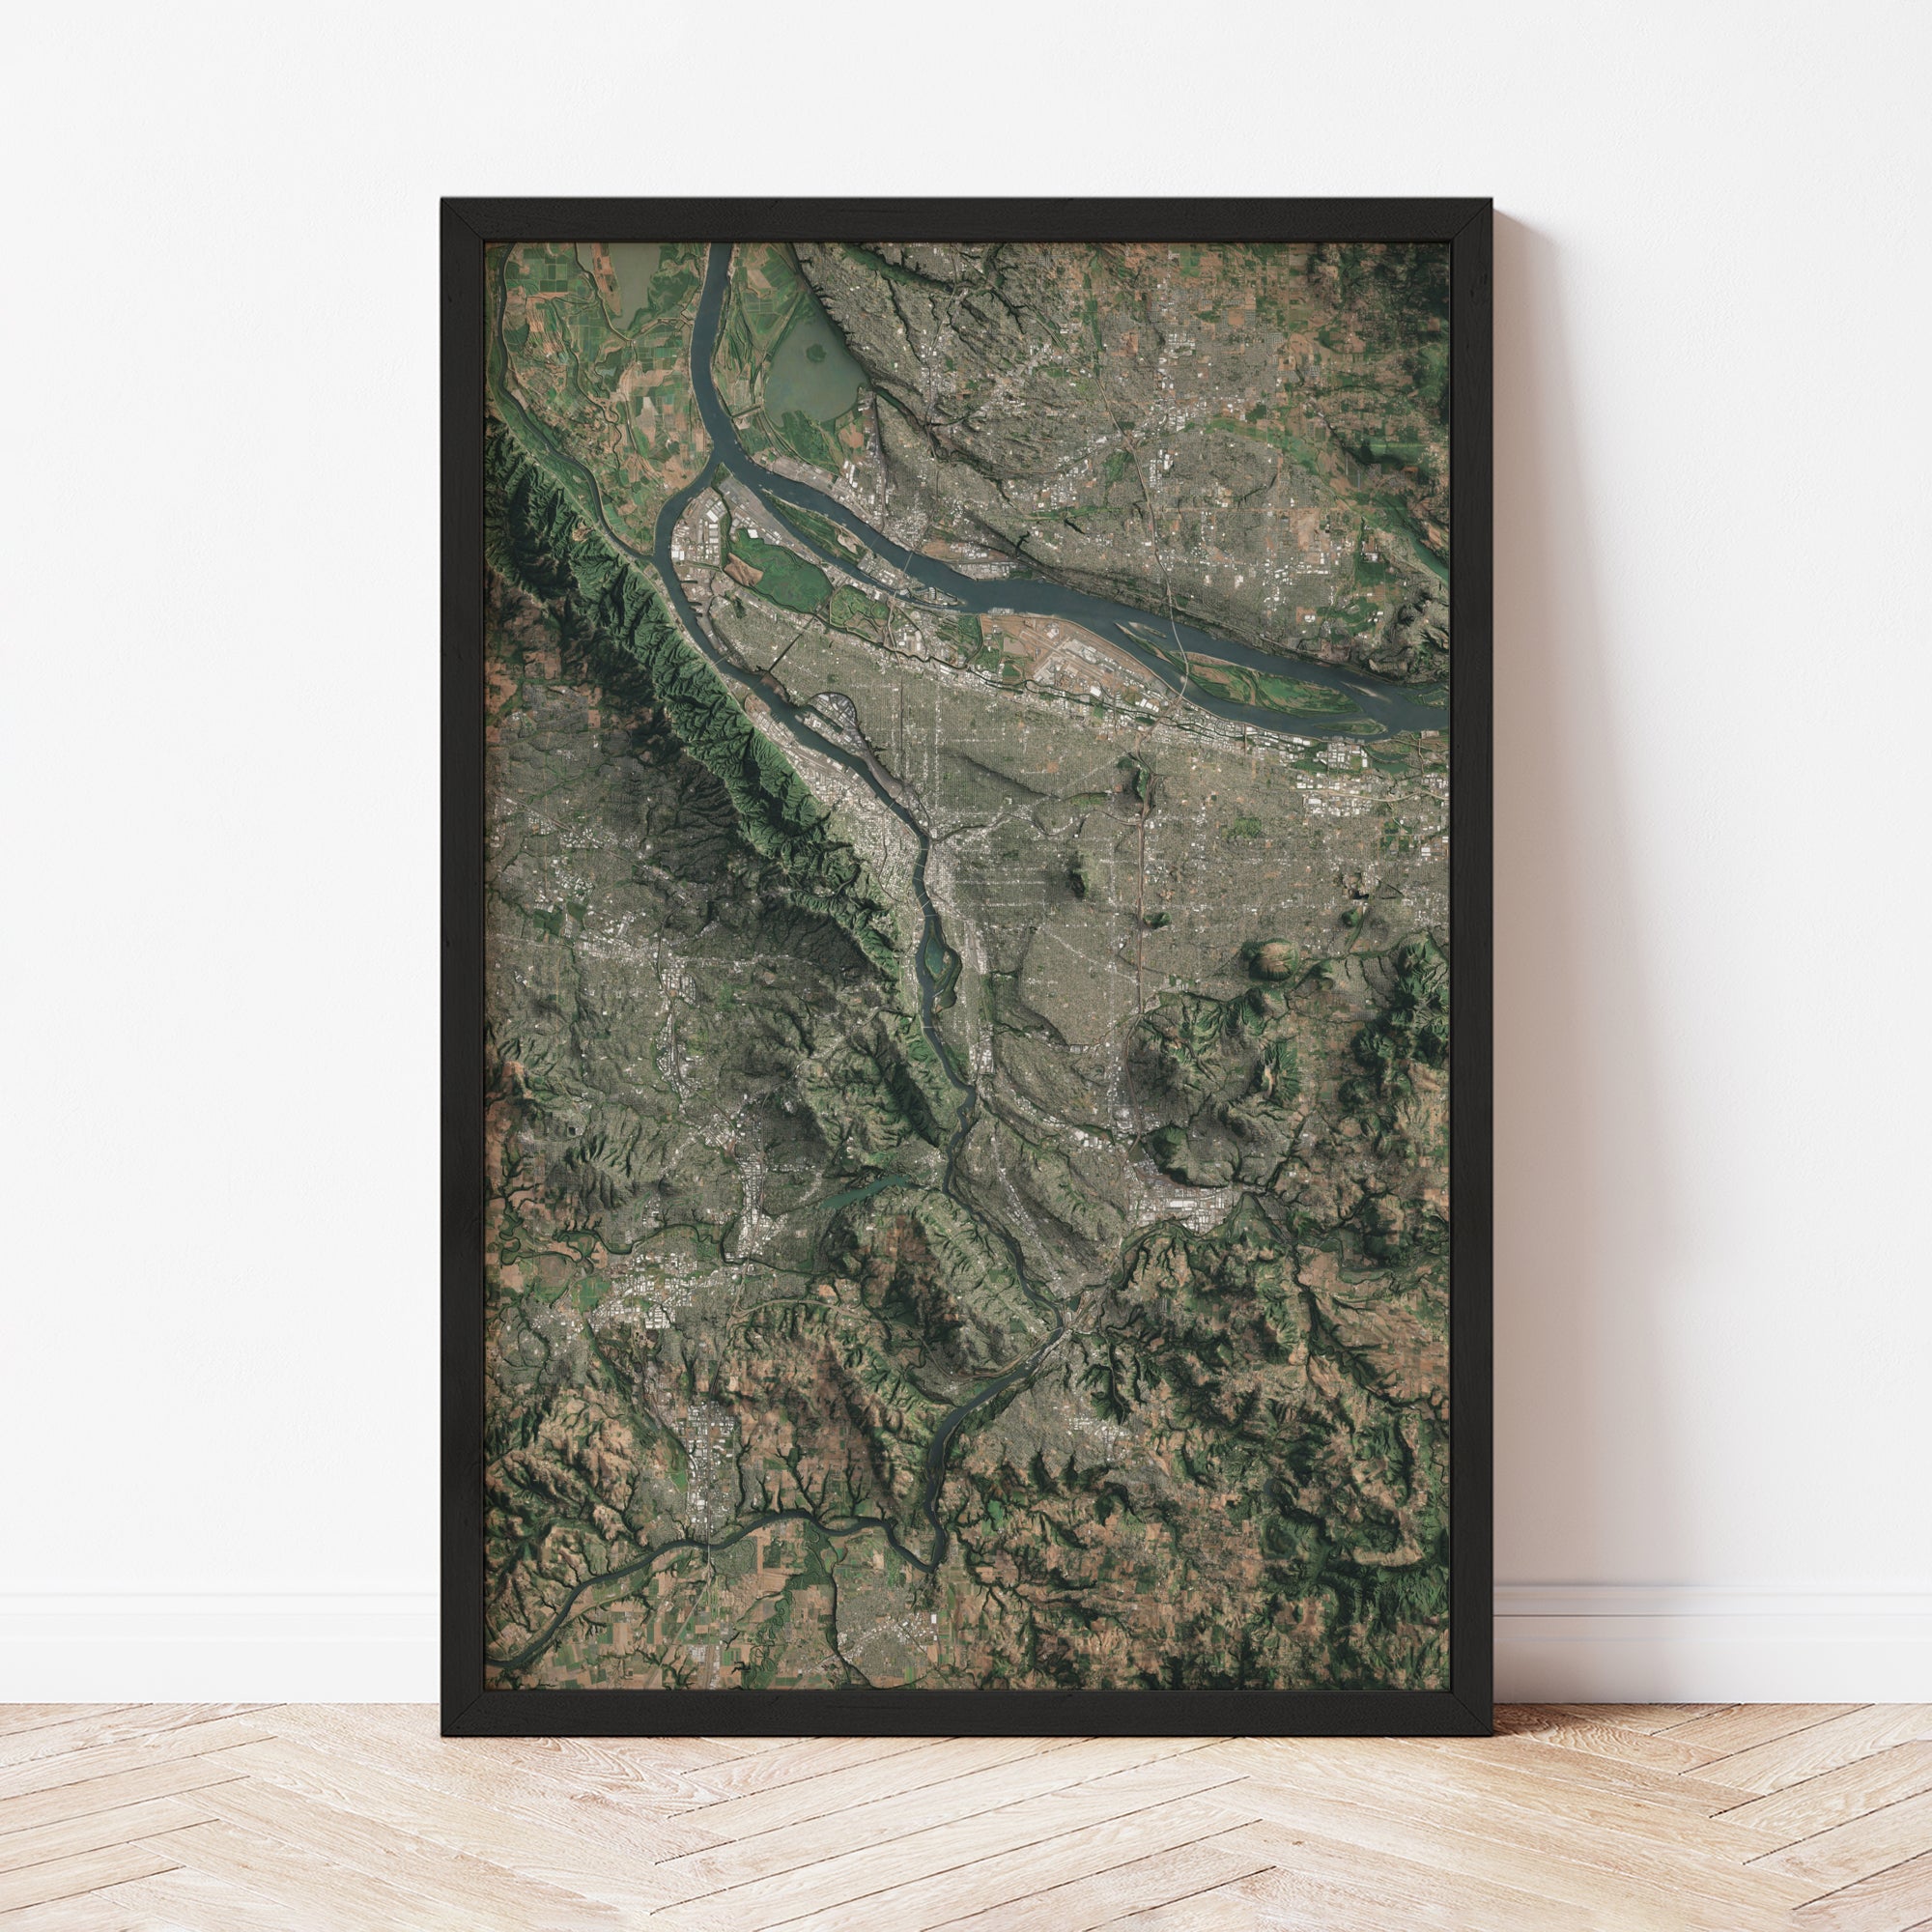 Portland, OR - Satellite Imagery